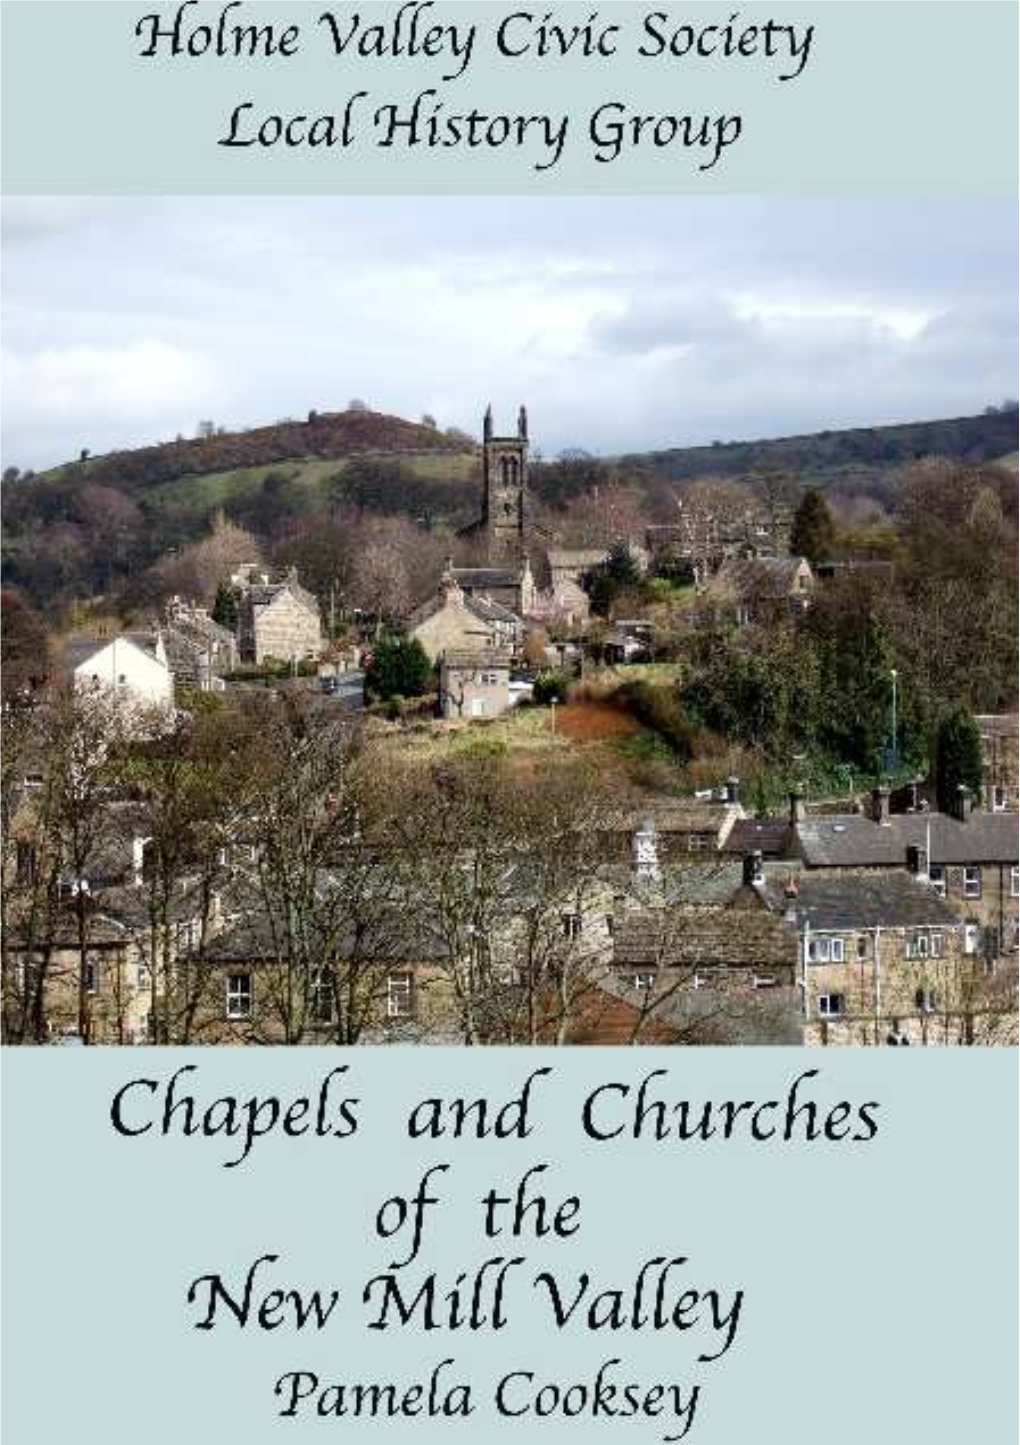 CHAPELS and CHURCHES of the NEW MILL VALLEY by Pamela